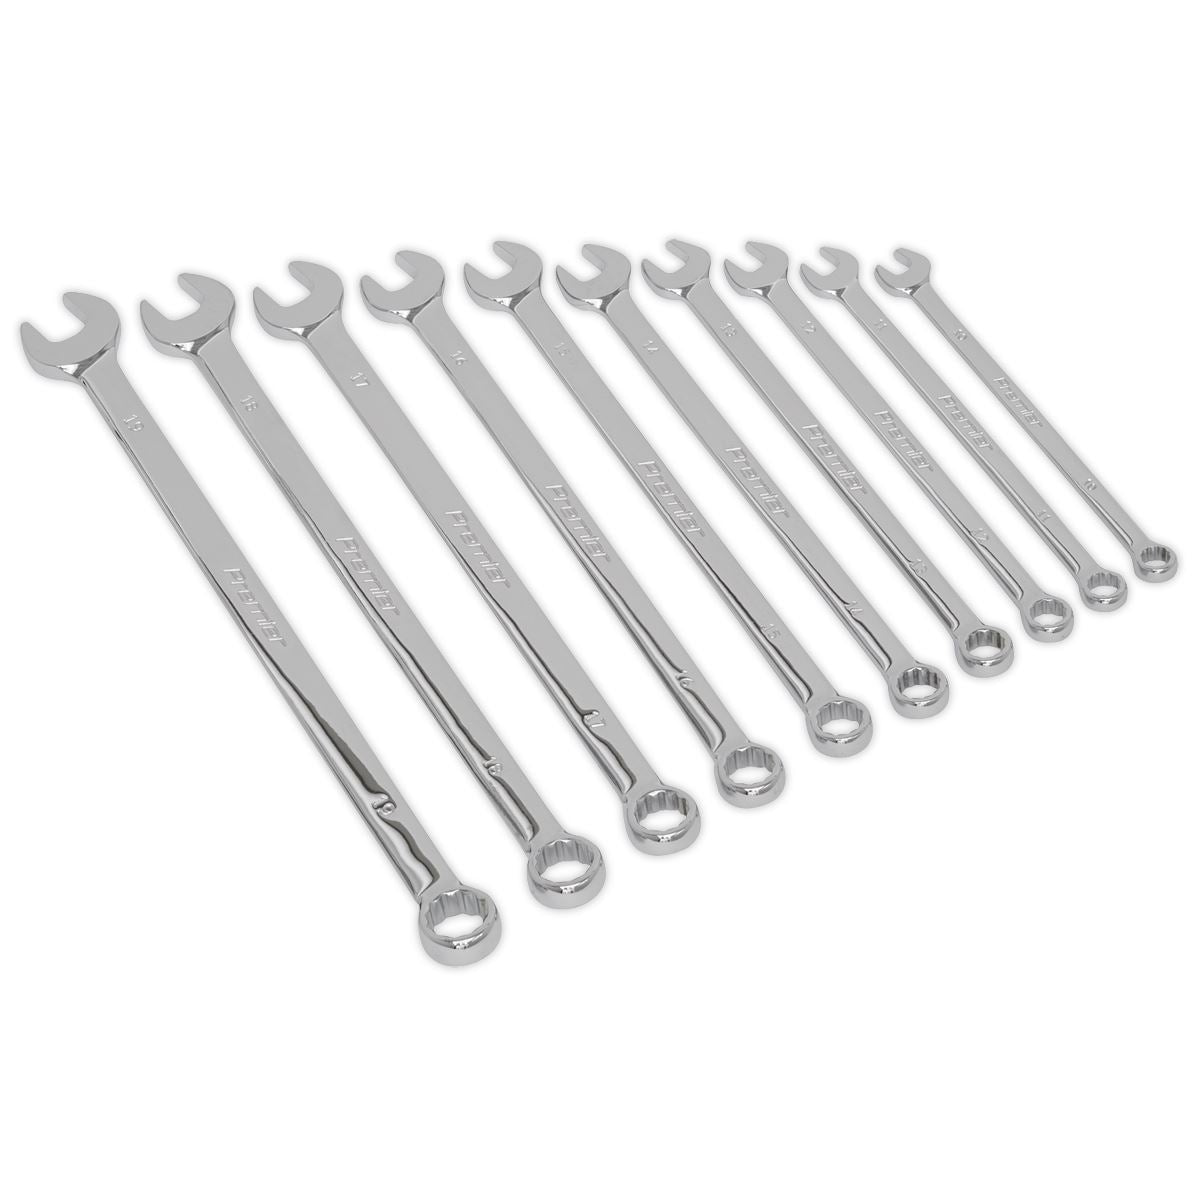 Sealey Premier Combination Spanner Set 10pc Extra-Long Metric